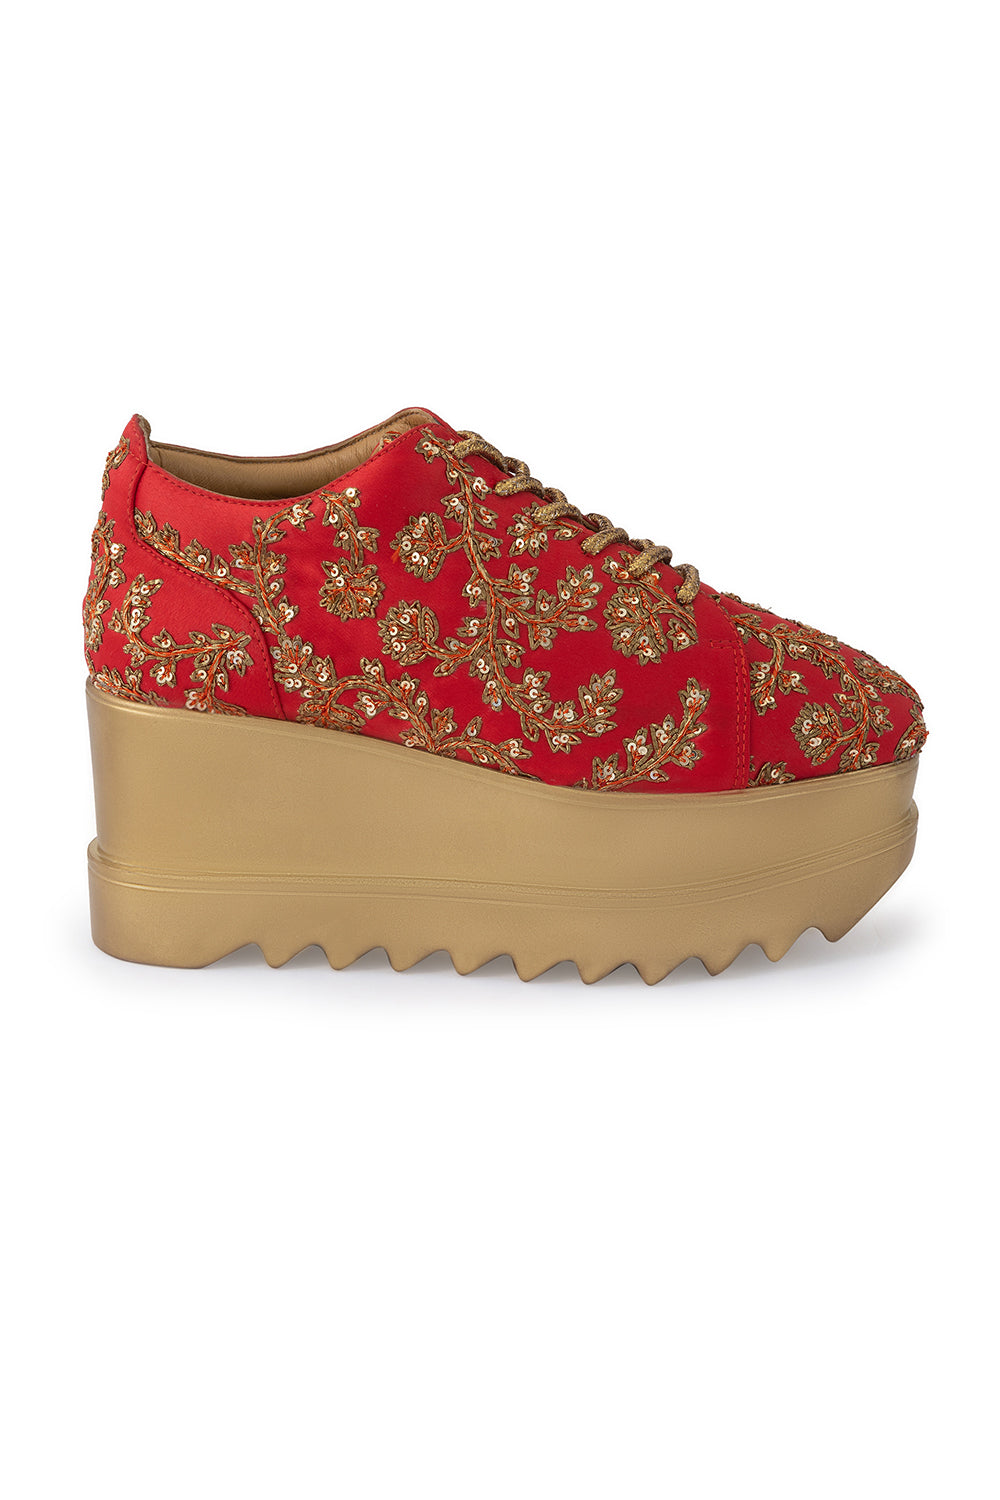 Tomato Red The Heirloom Signature Wedge Sneakers